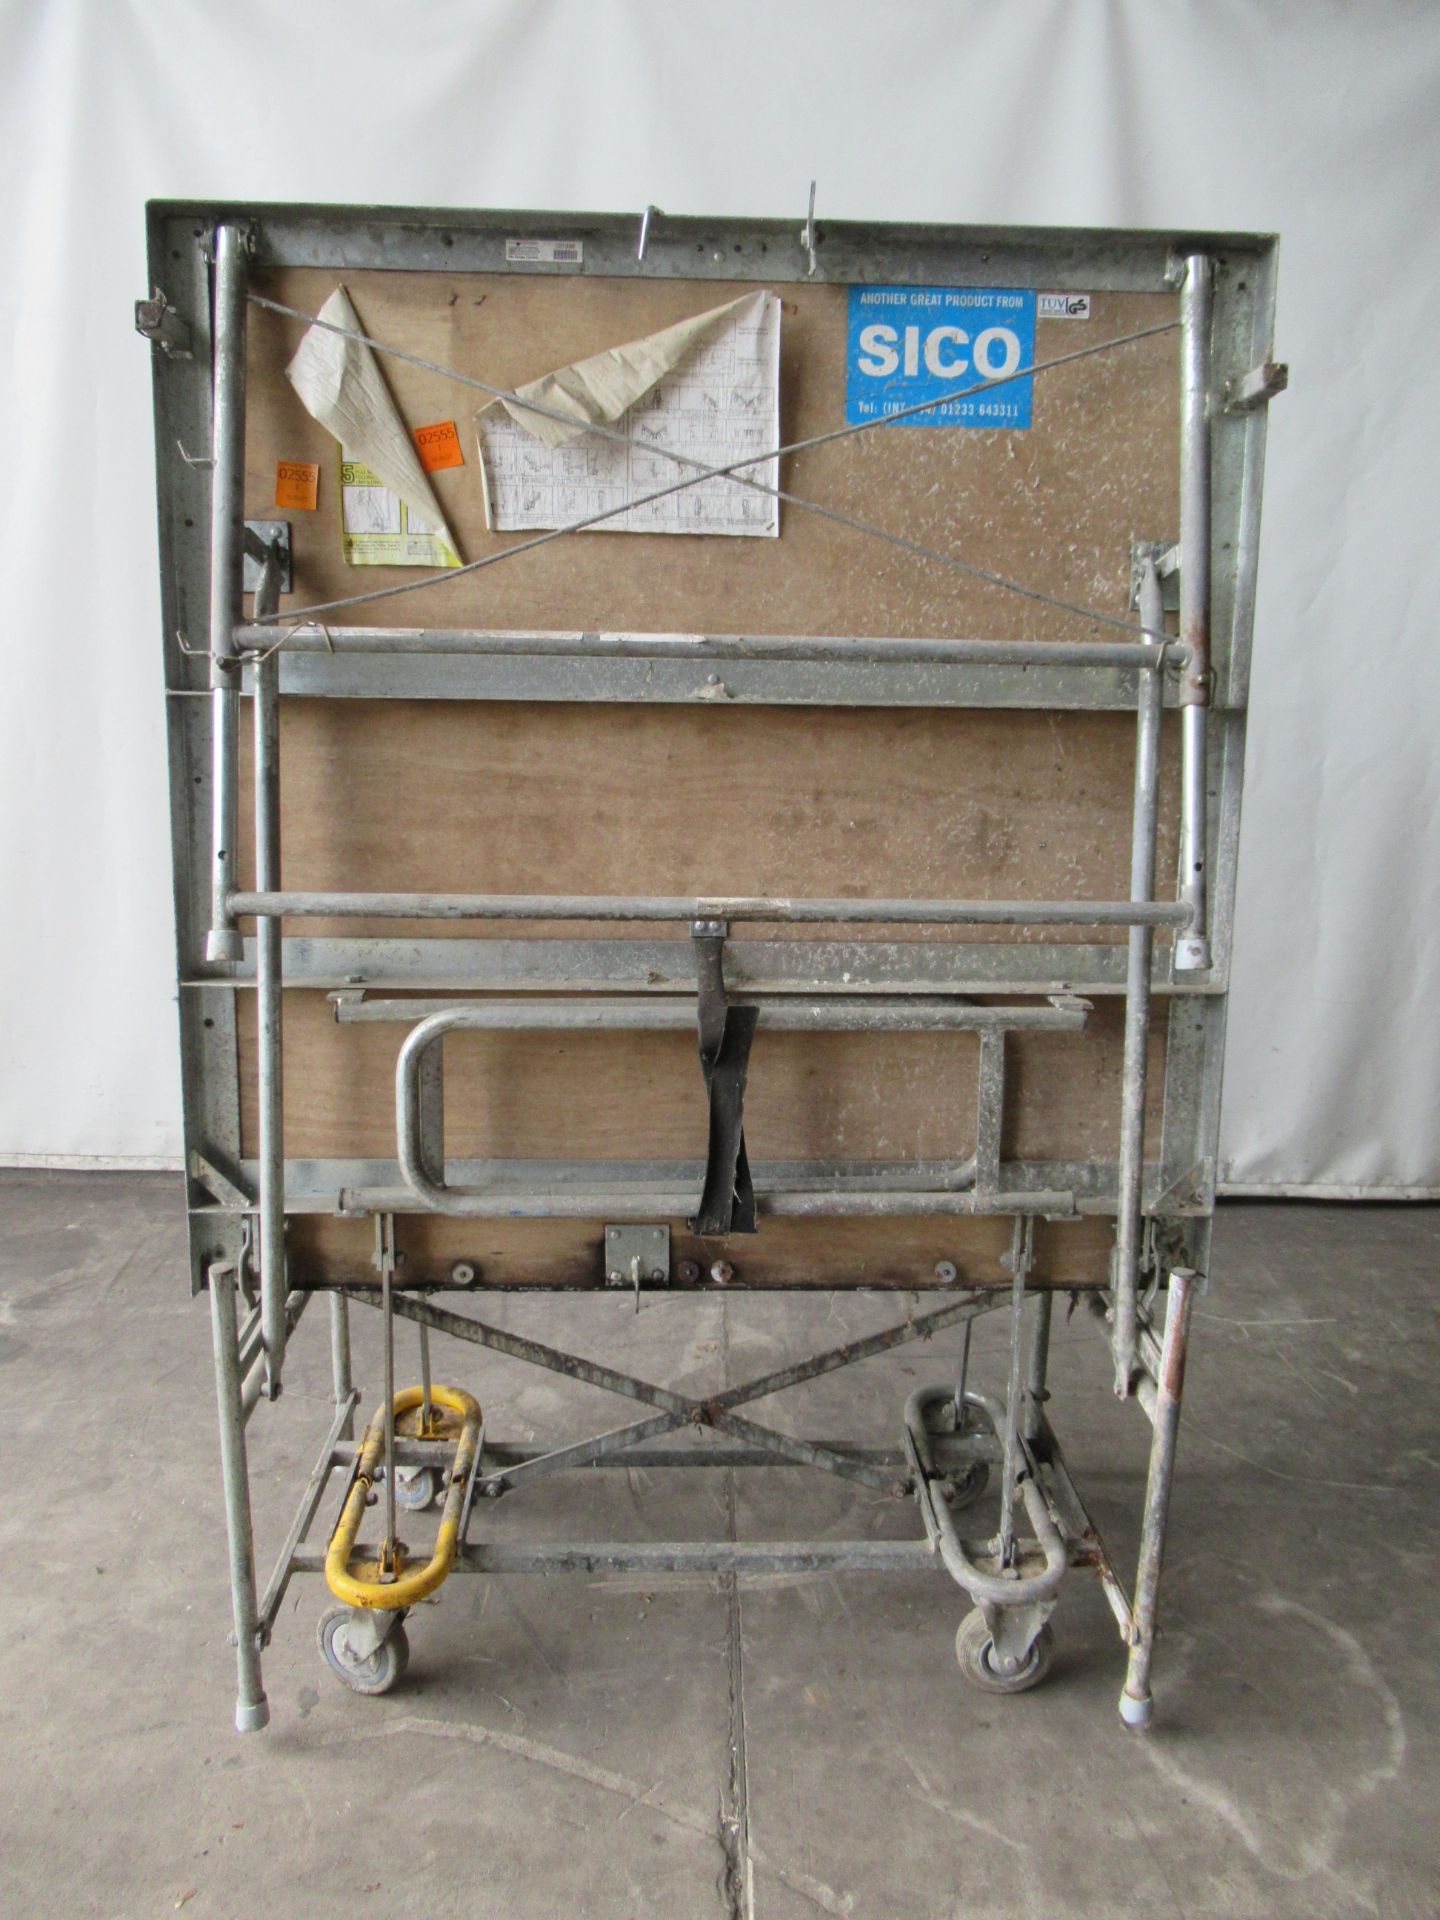 Sico 8' x 4' Folding Portable Staging - Image 8 of 8